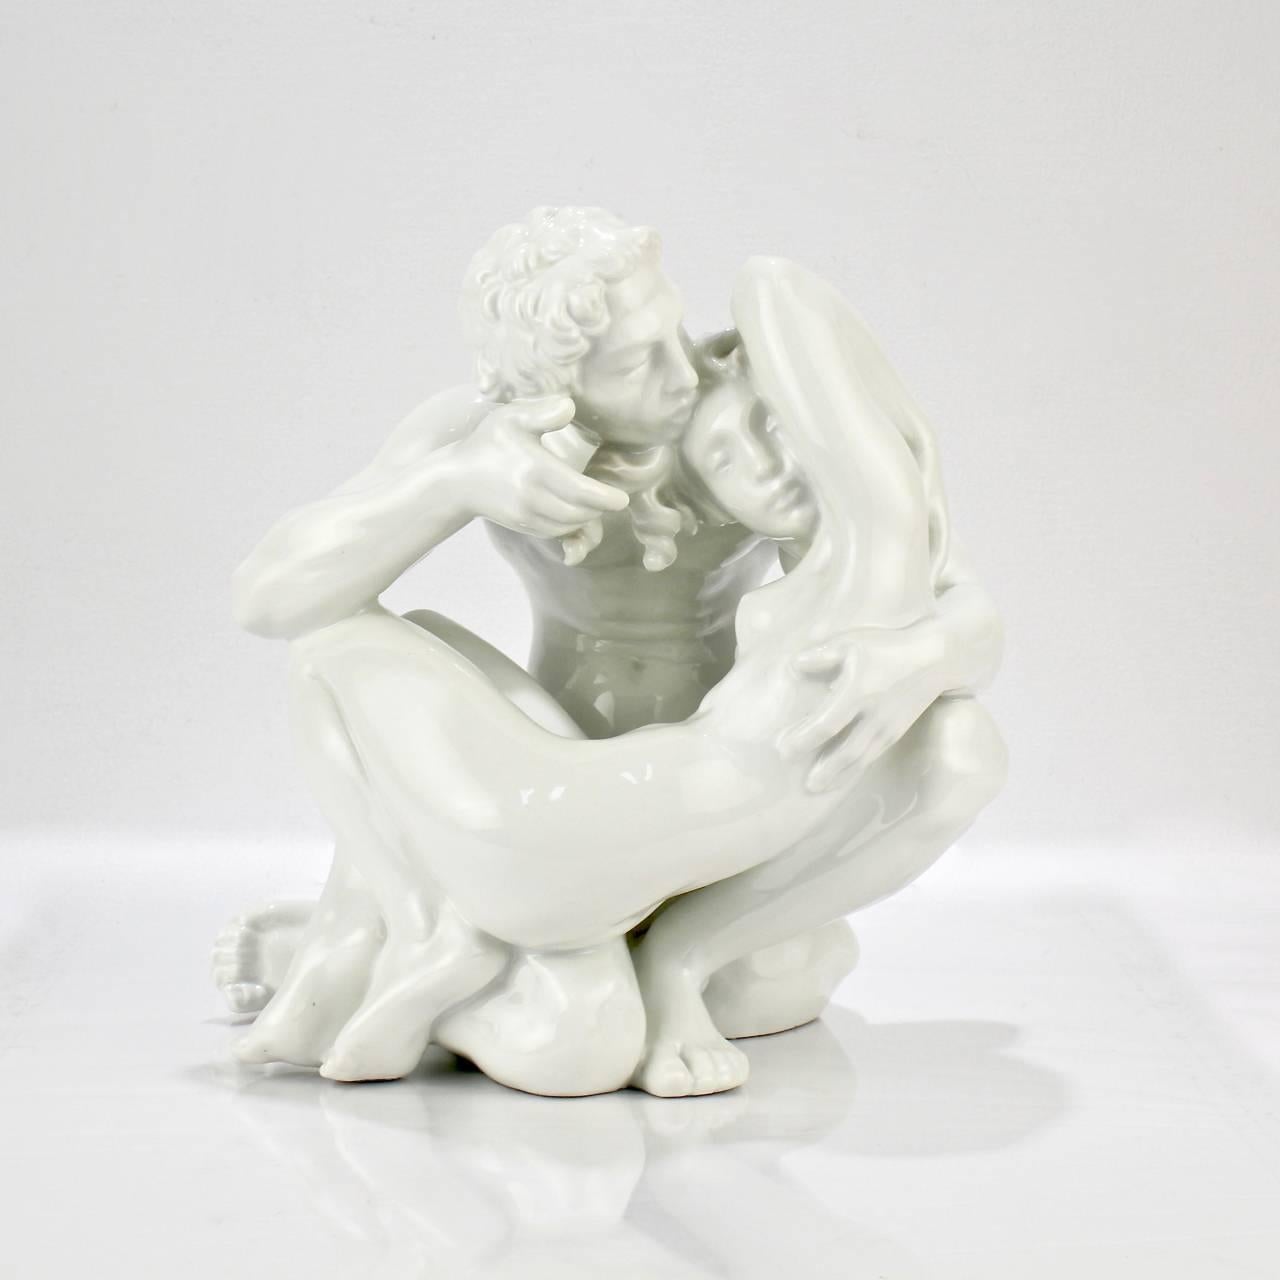 An alluring Art Deco period Danish blanc-de-chine porcelain figurine of tenderly entwined lovers by Jen Jacob Bregno for Dahl Jensen.

Entitled: Paradise

Base bears a green underglaze factory mark and model no. 1184.

Measure: Height ca. 10